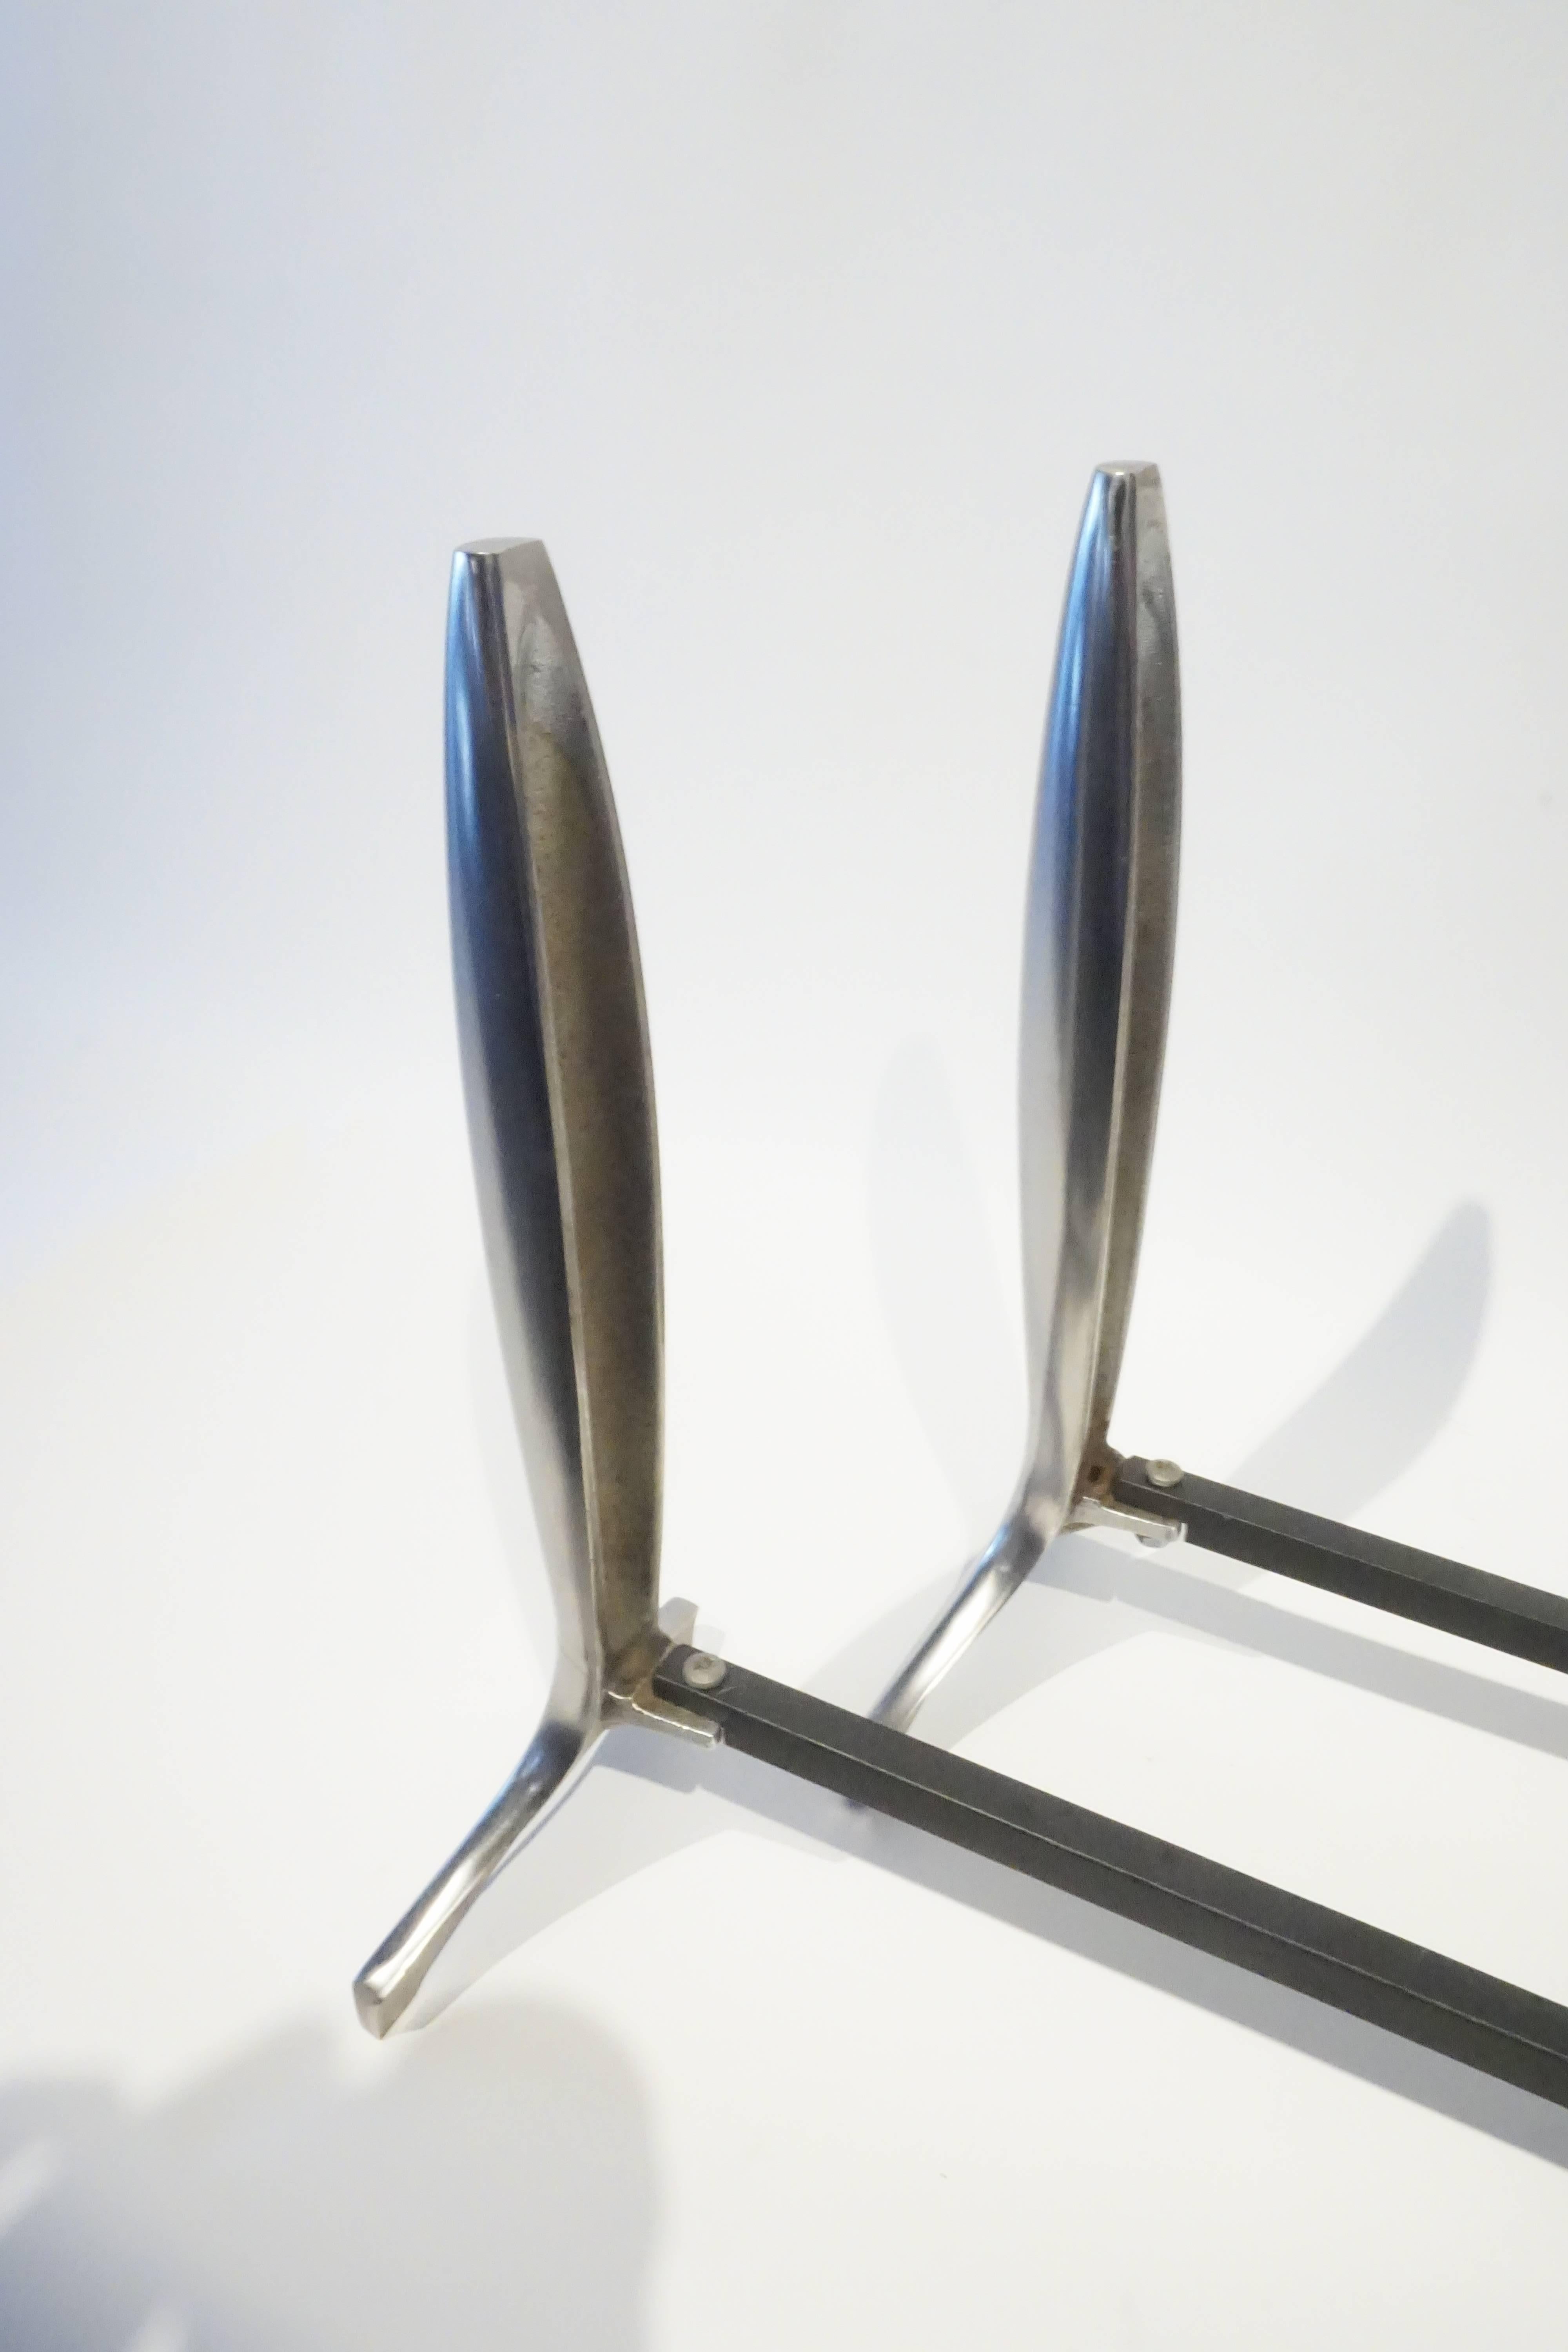 A pair of American modernist polished aluminum andirons from the 1940s. The form of the andirons is referential to Industrial design and rocket forms that were avant-garde after the deco period.